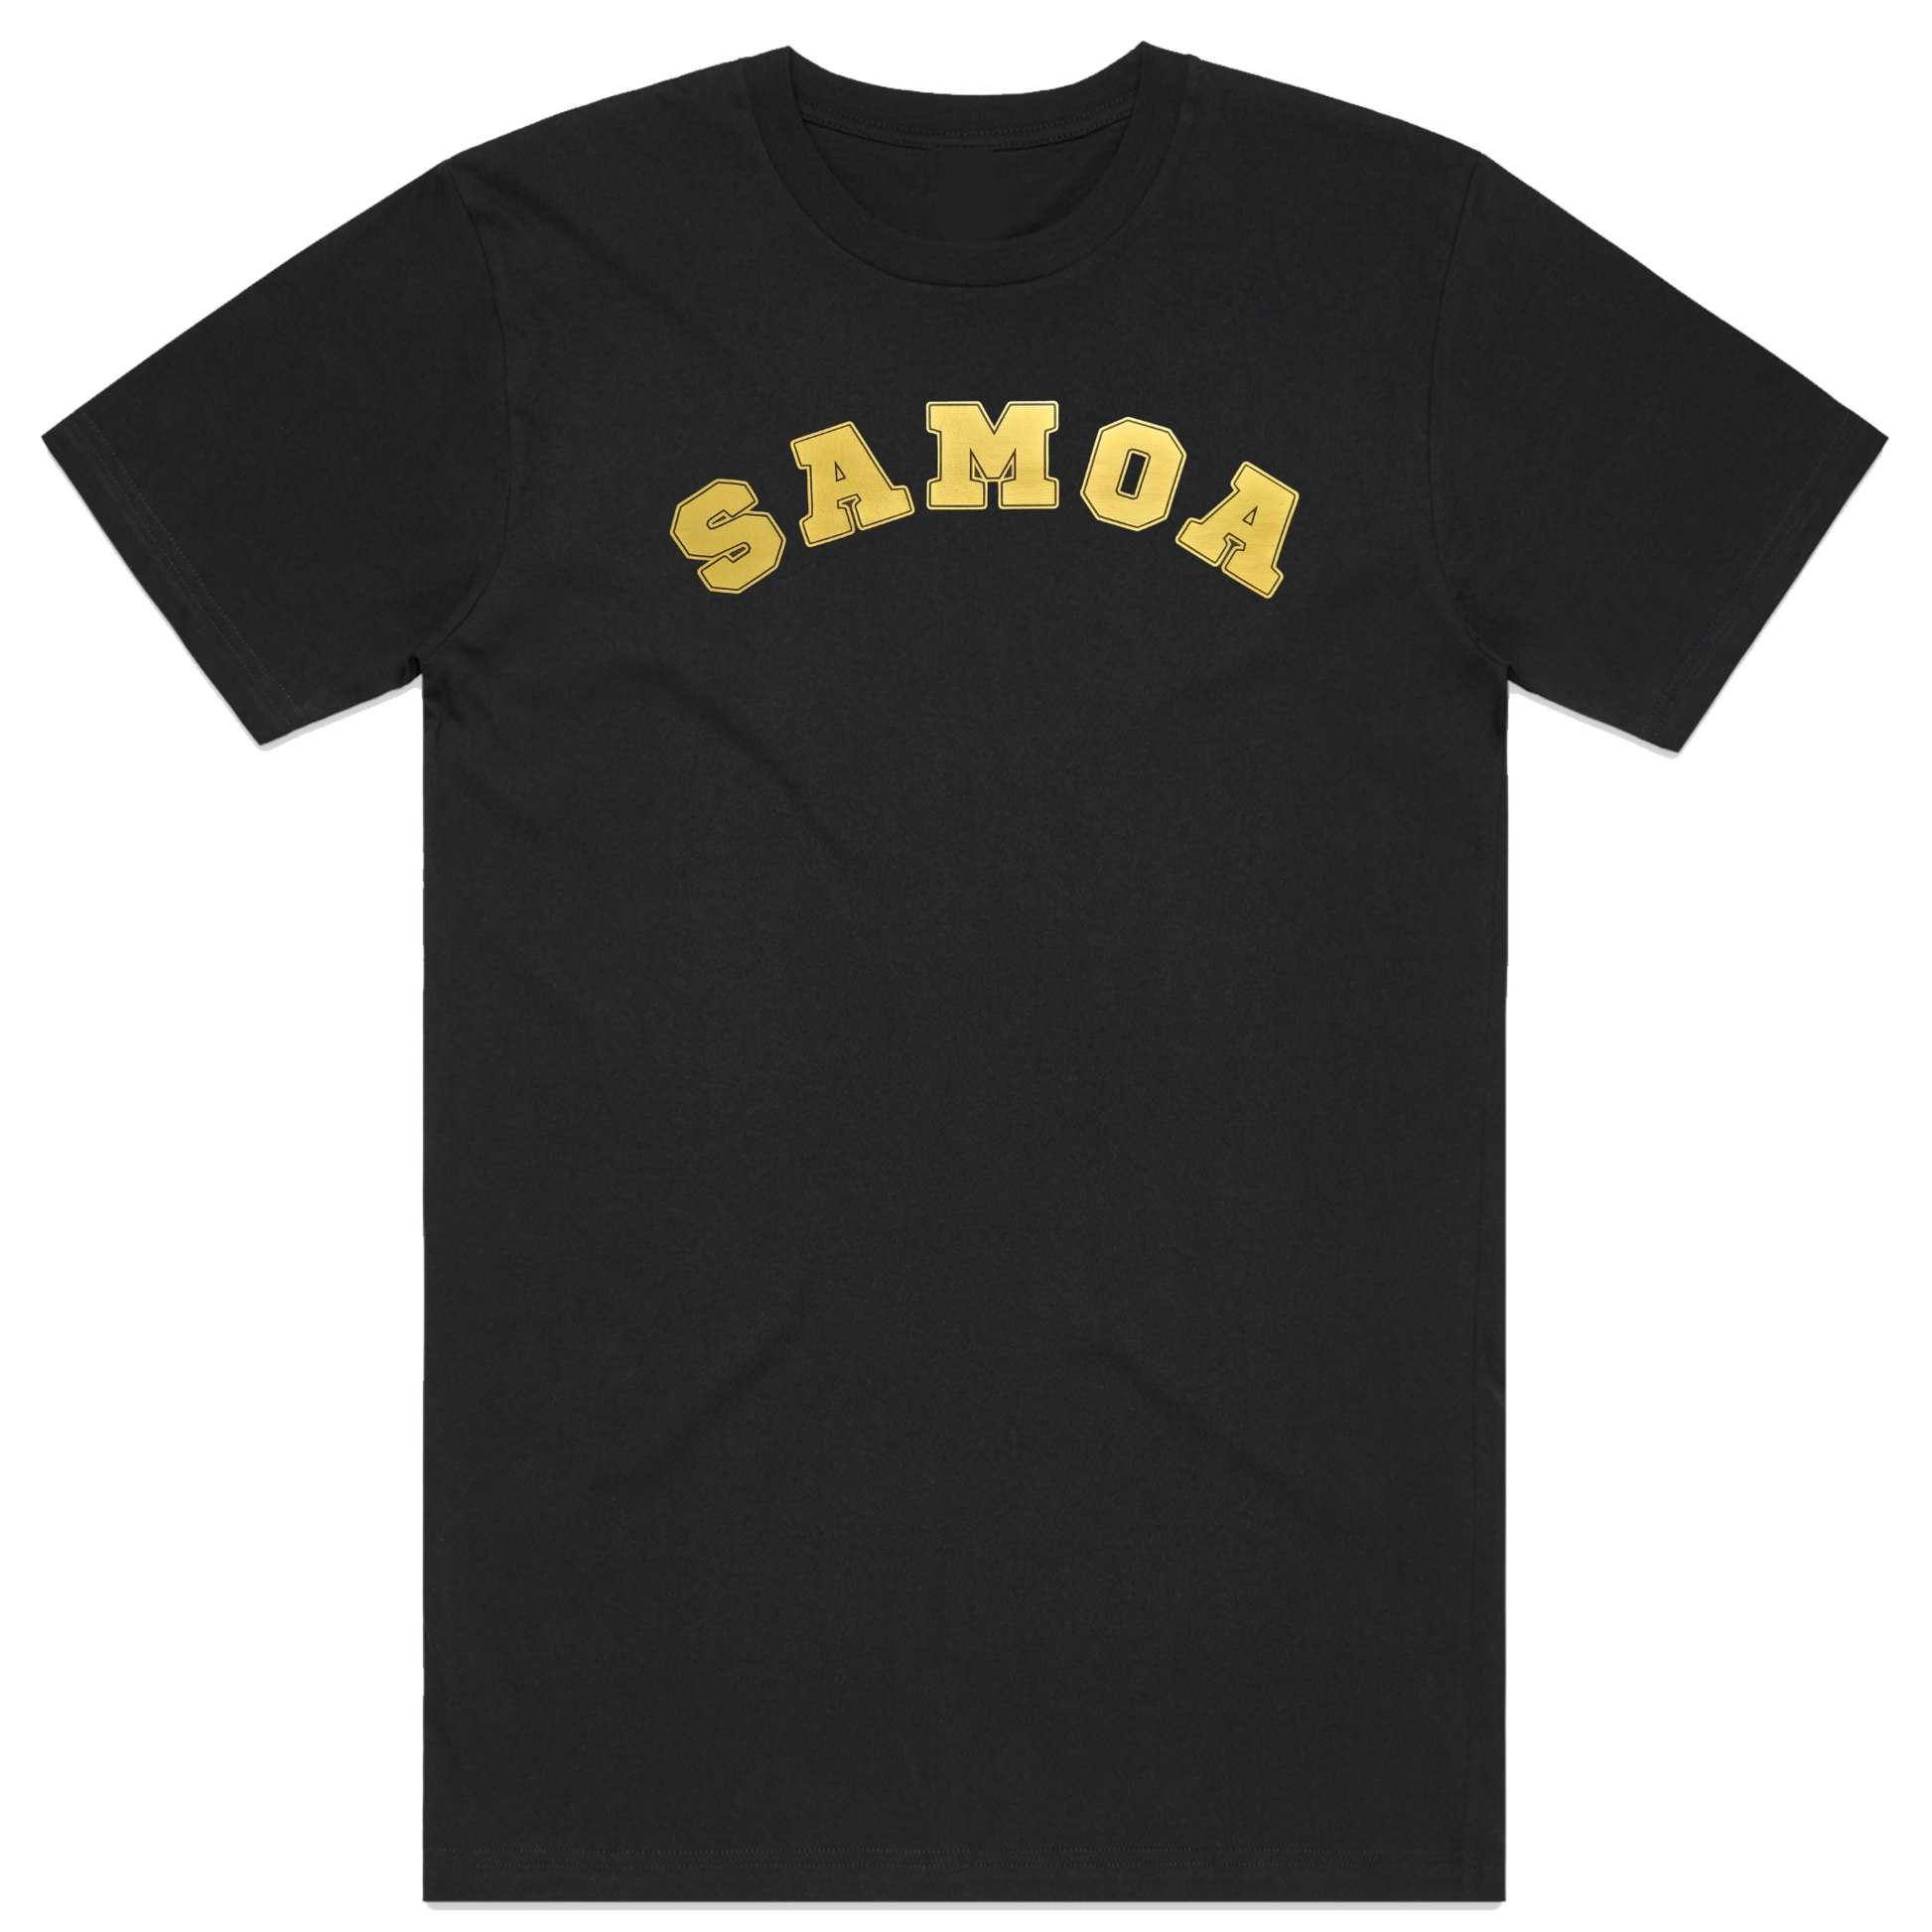 Samoa collage styled lettering on black t-shirt. perfect for everyday wear.